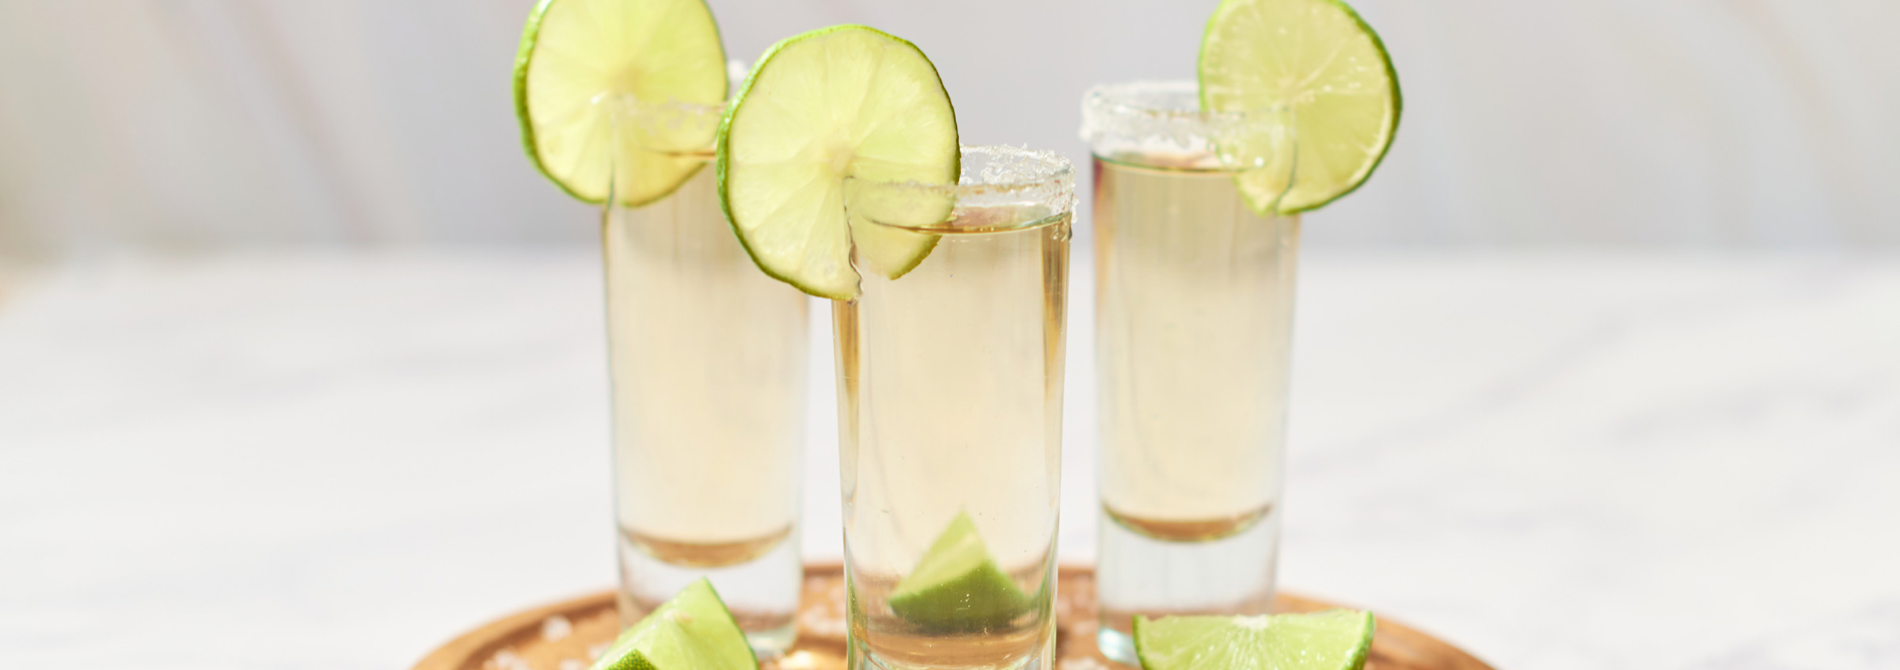 Drinking Tequila the Right Way: The Tequila Slammer